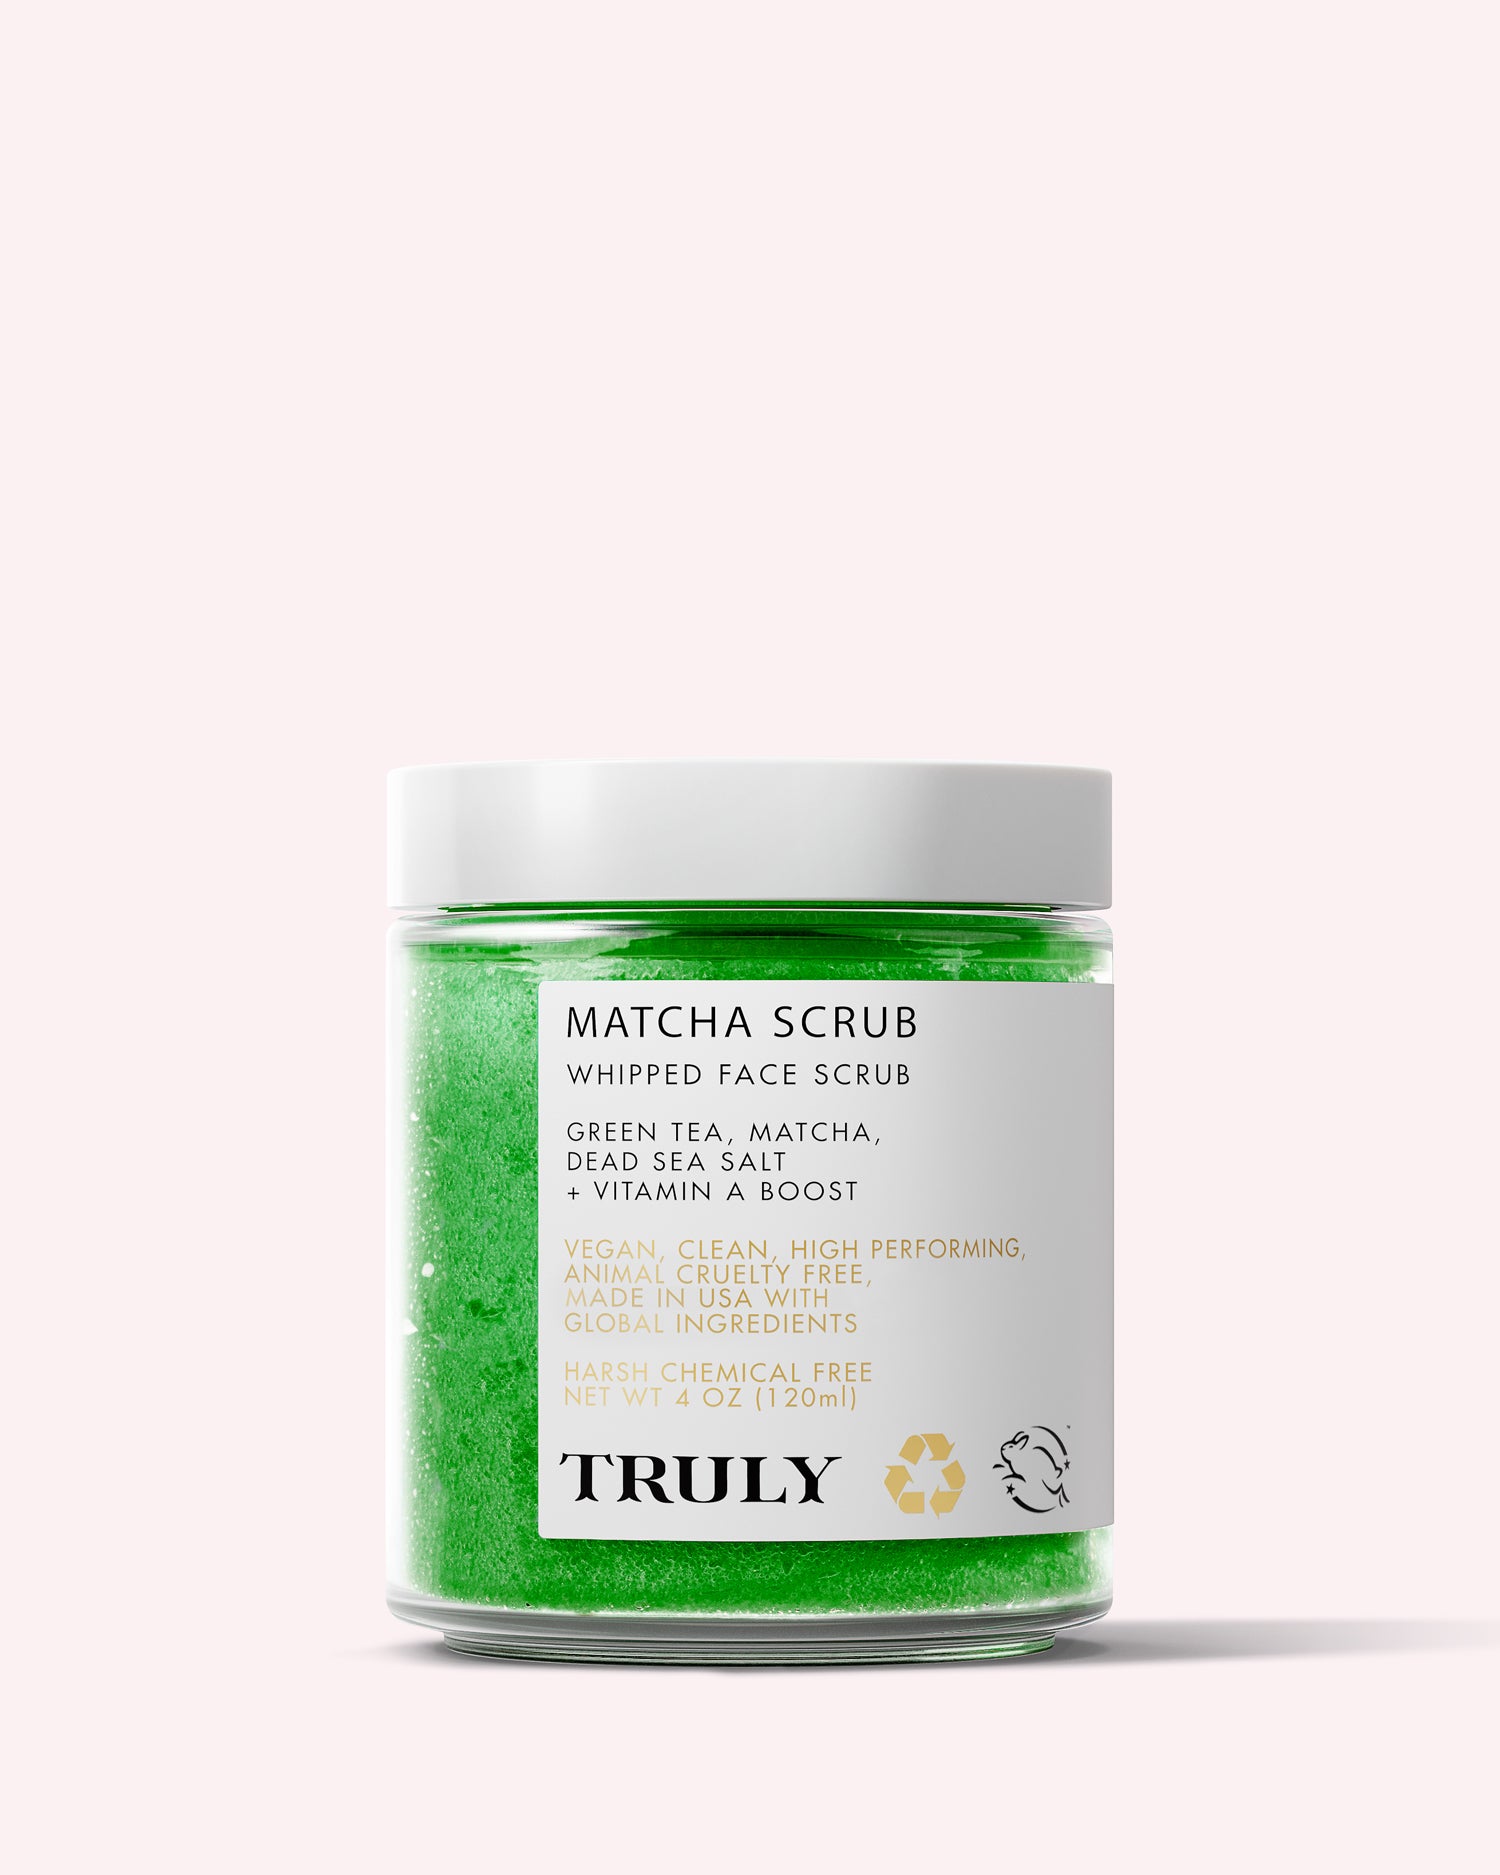  Truly Beauty products combine brightening and tightening body  scrub and skin exfoliator with serums aimed at dark spots, blemishes while  combatting bacne, butt acne and other trouble spots : Beauty